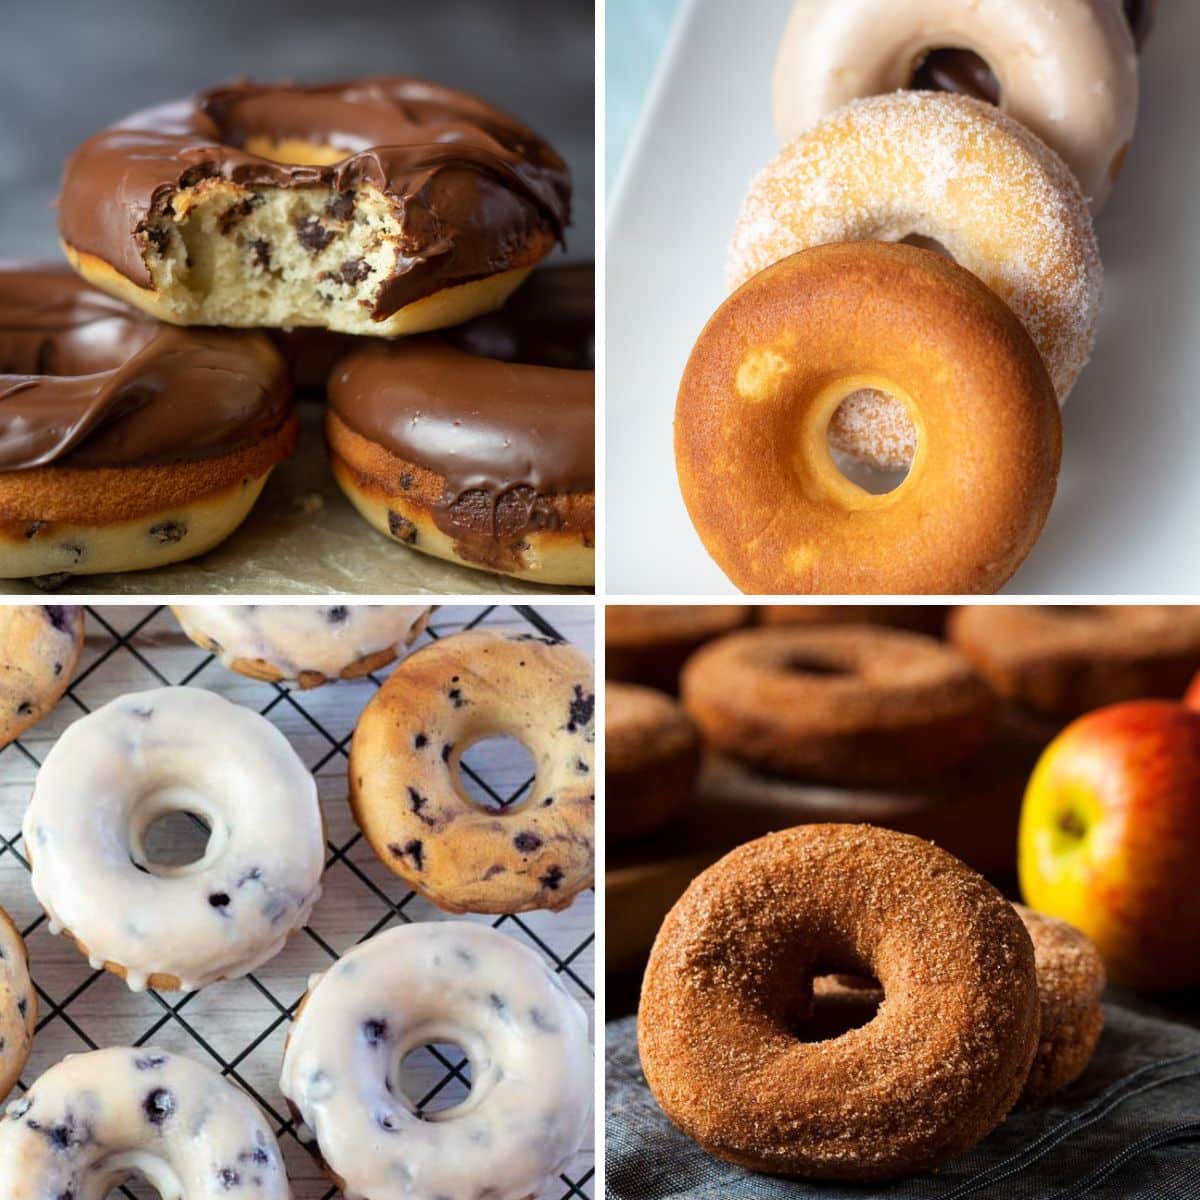 Best baked donut recipes to make for breakfast and on-the-go snacks like these 4 tasty flavors.